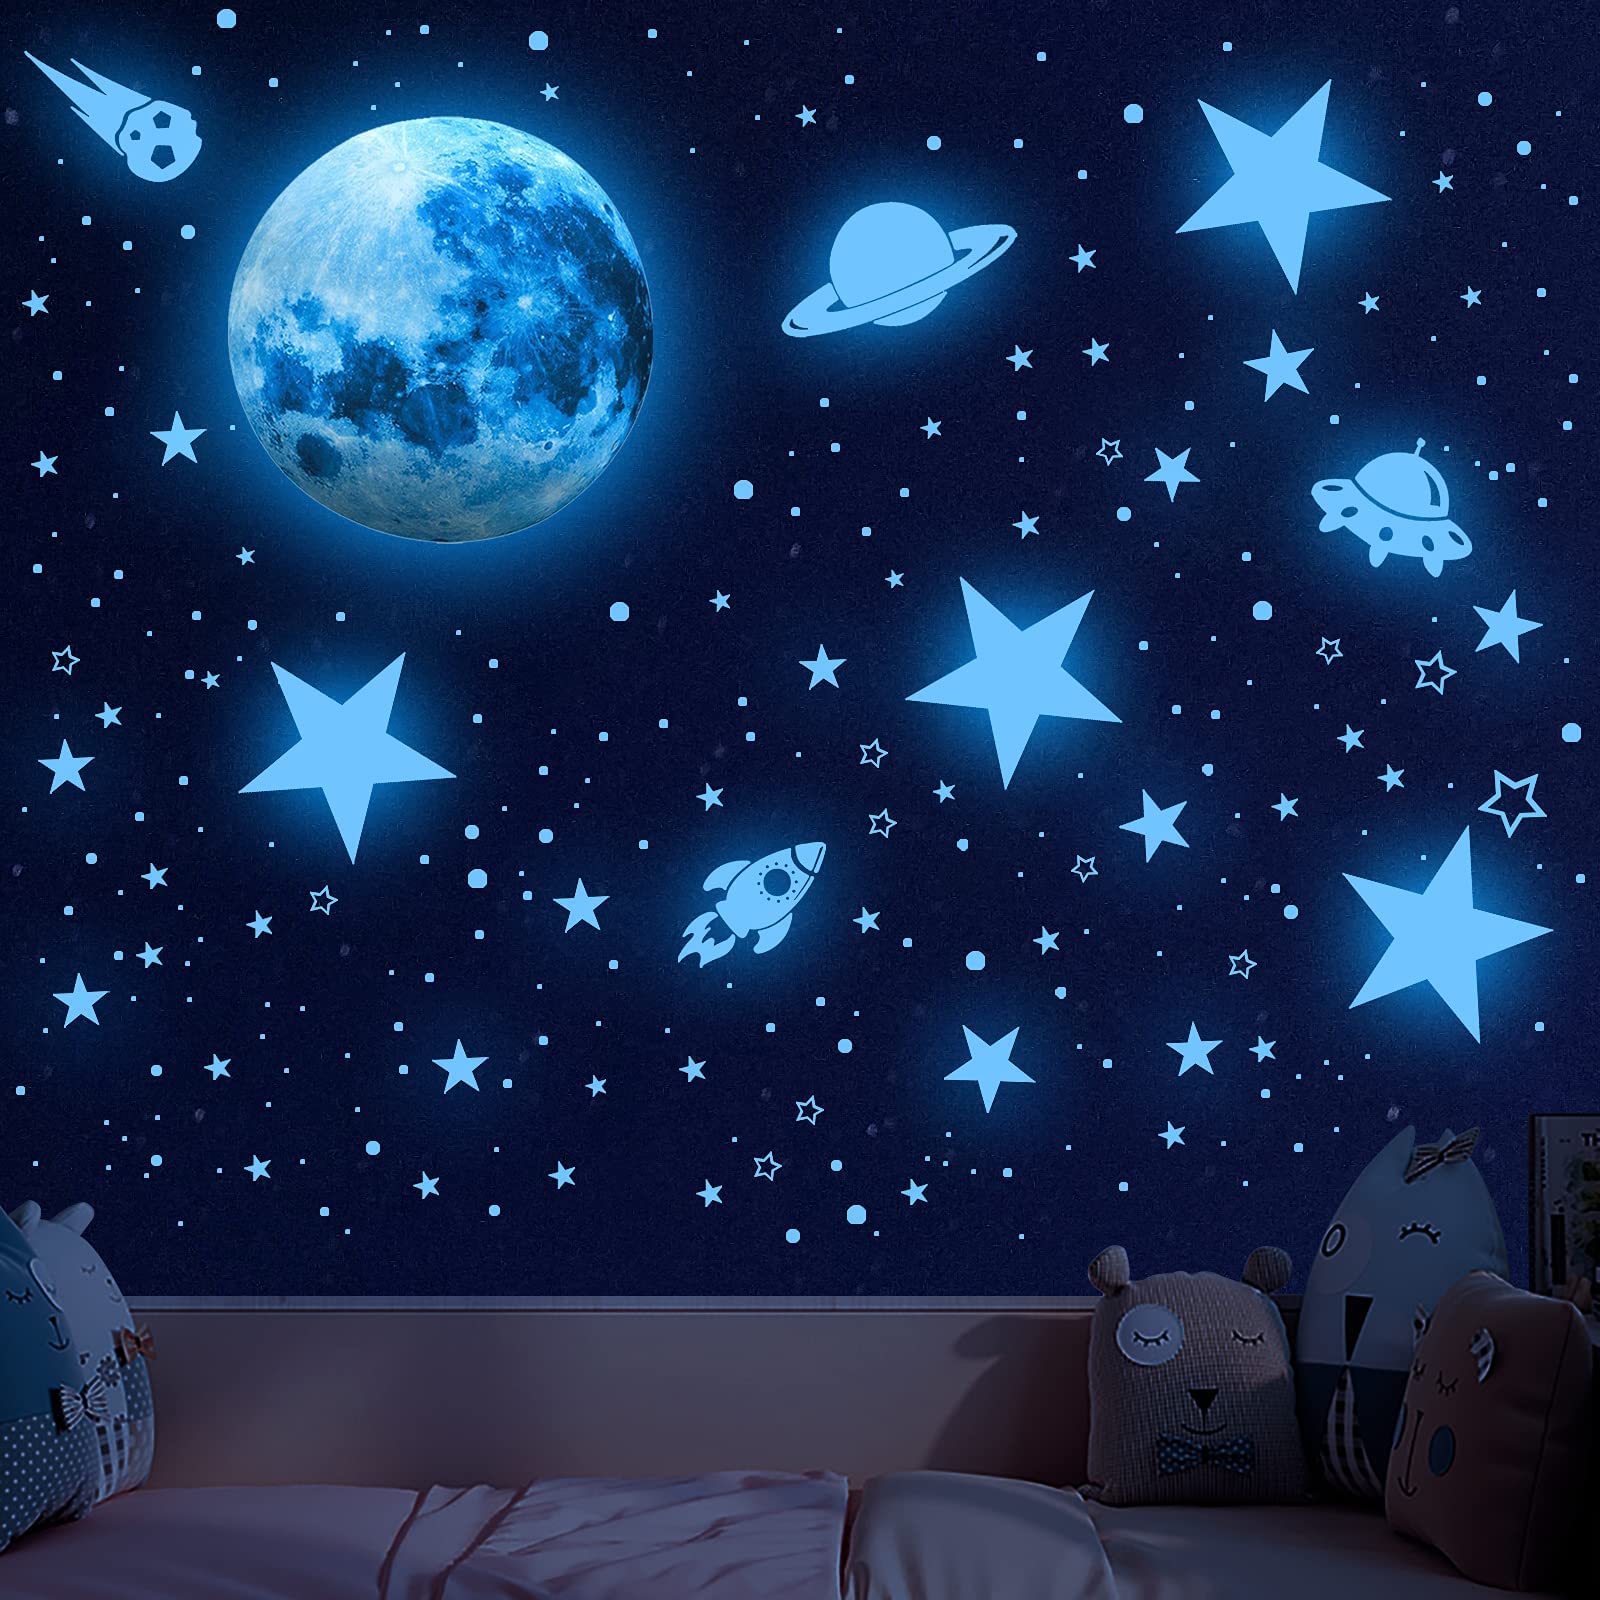 Glowing Stars for Ceiling, 1008 PCS Glow in The Dark Stars,Space Wall Decals Solar System Galaxy Planets Wall Stickers for Kids, Wall Decor for Gilrs Kids Bedroom Nursery Birthday Party Favor